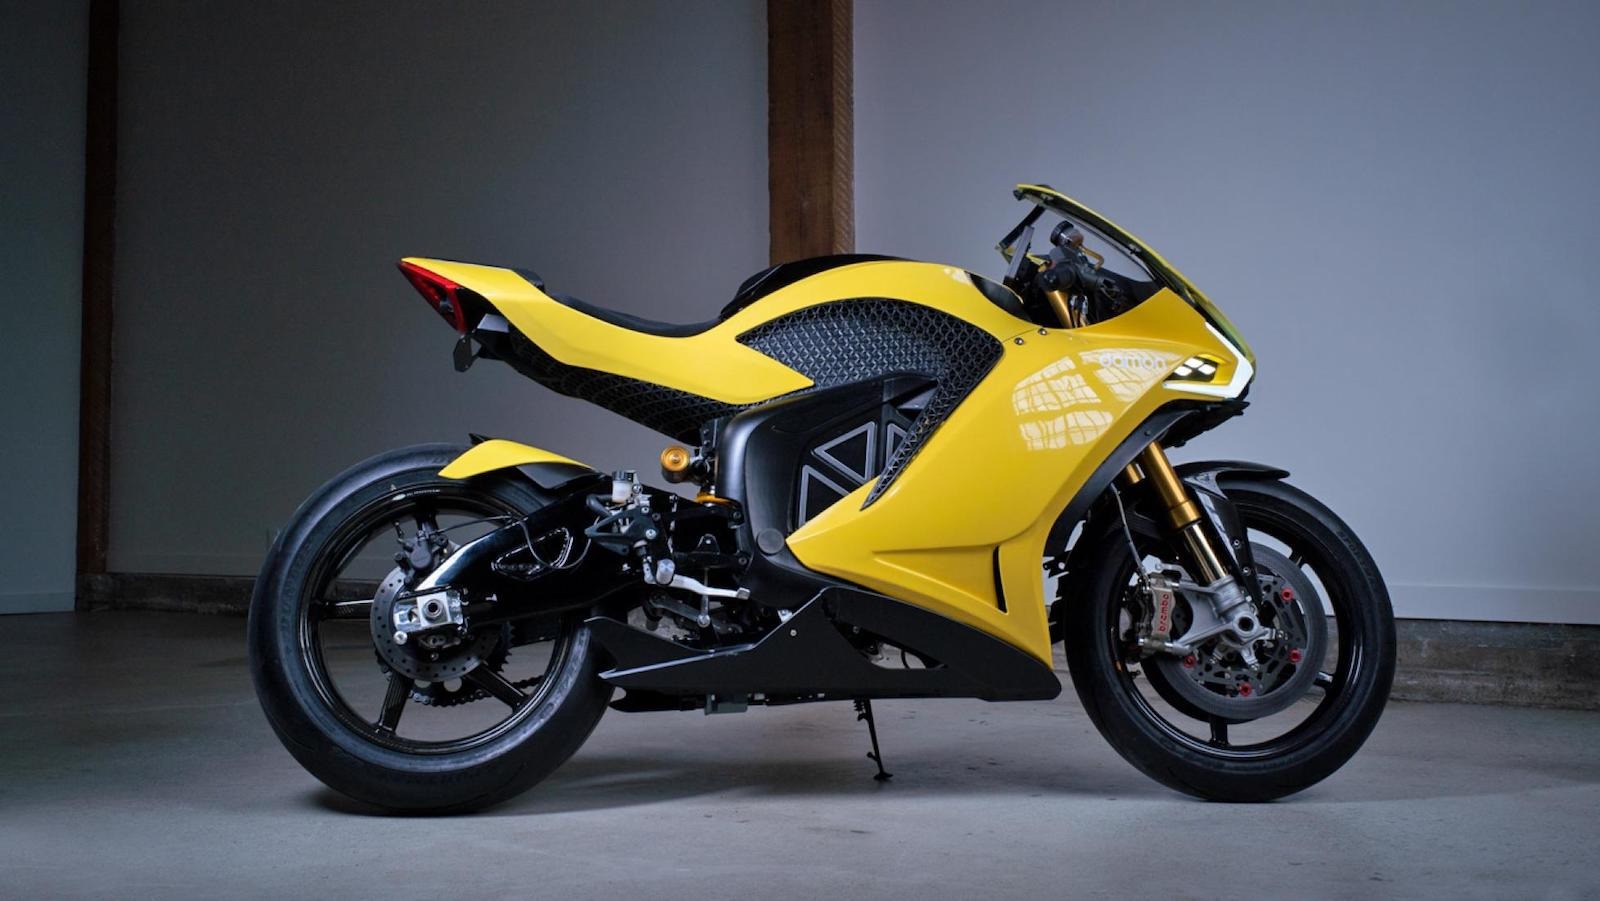 Damon HyperSport is an all-electric sportbike with a 200-mile range and 360-degree warnings